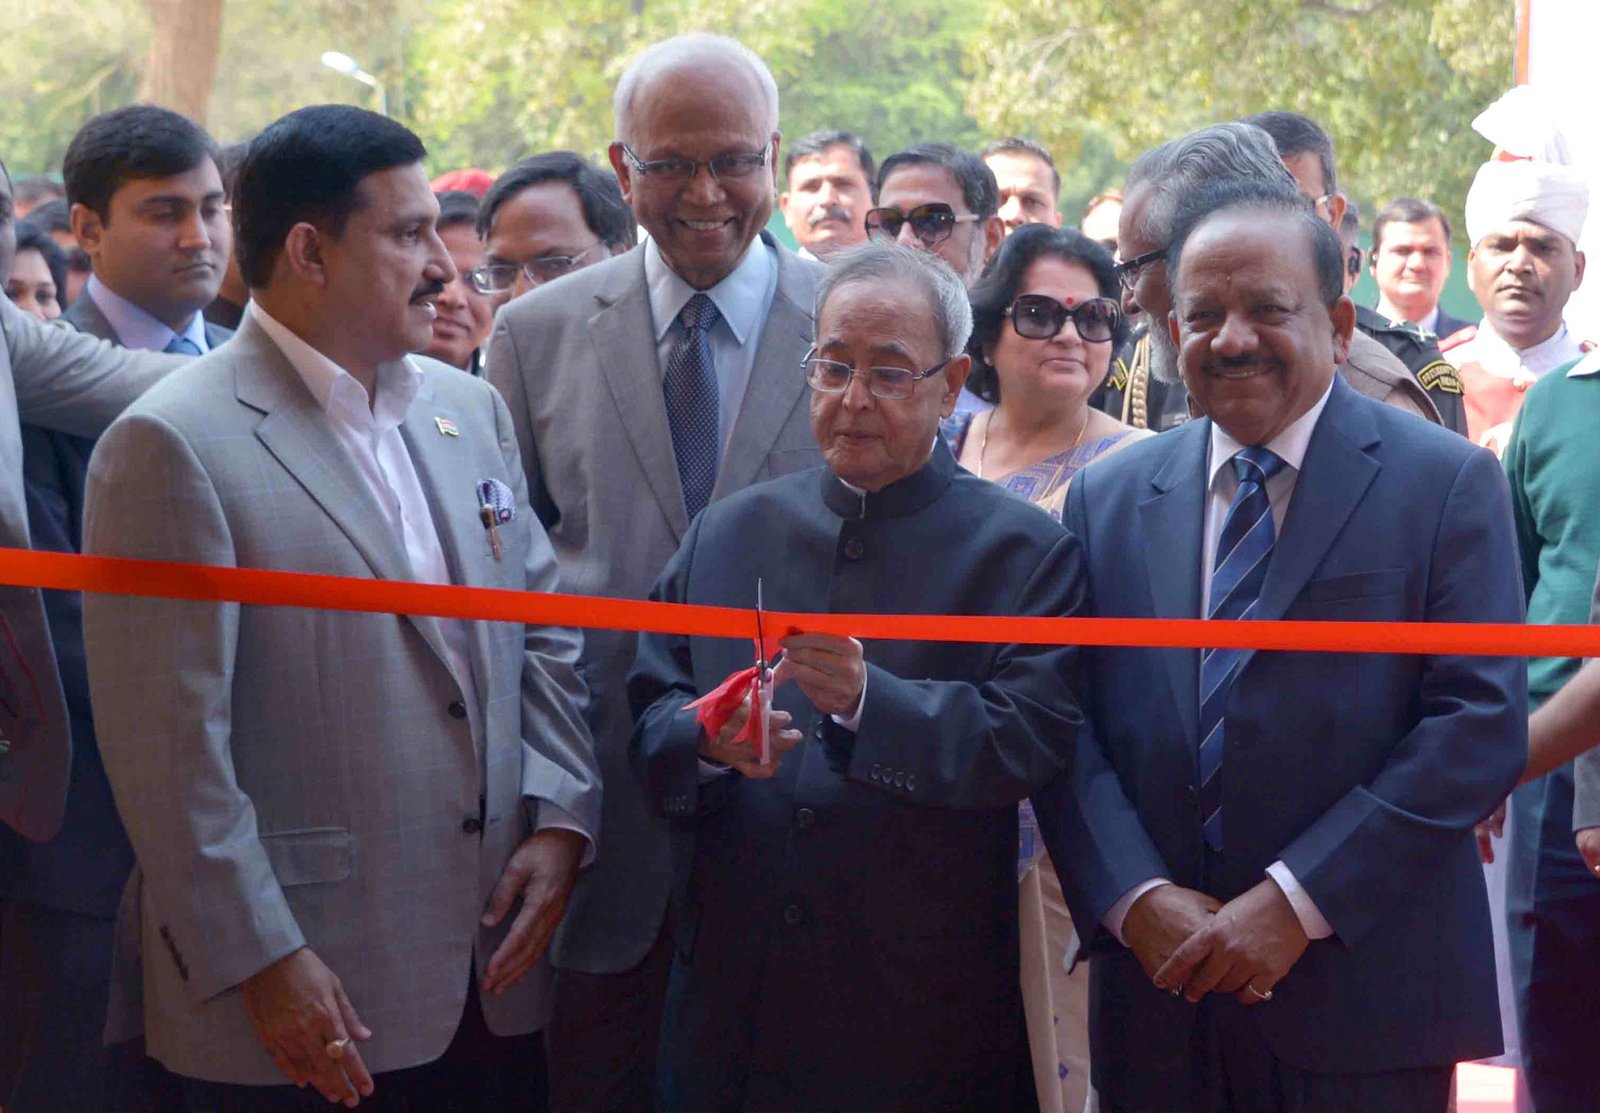 The President, Mr Pranab Mukherjee inaugurating the Innovation Exhibition, at Rashtrapati Bhavan, in New Delhi on March 07, 2015. The union minister for science and technology and earth sciences, Dr Harsh Vardhan also seen in the pic